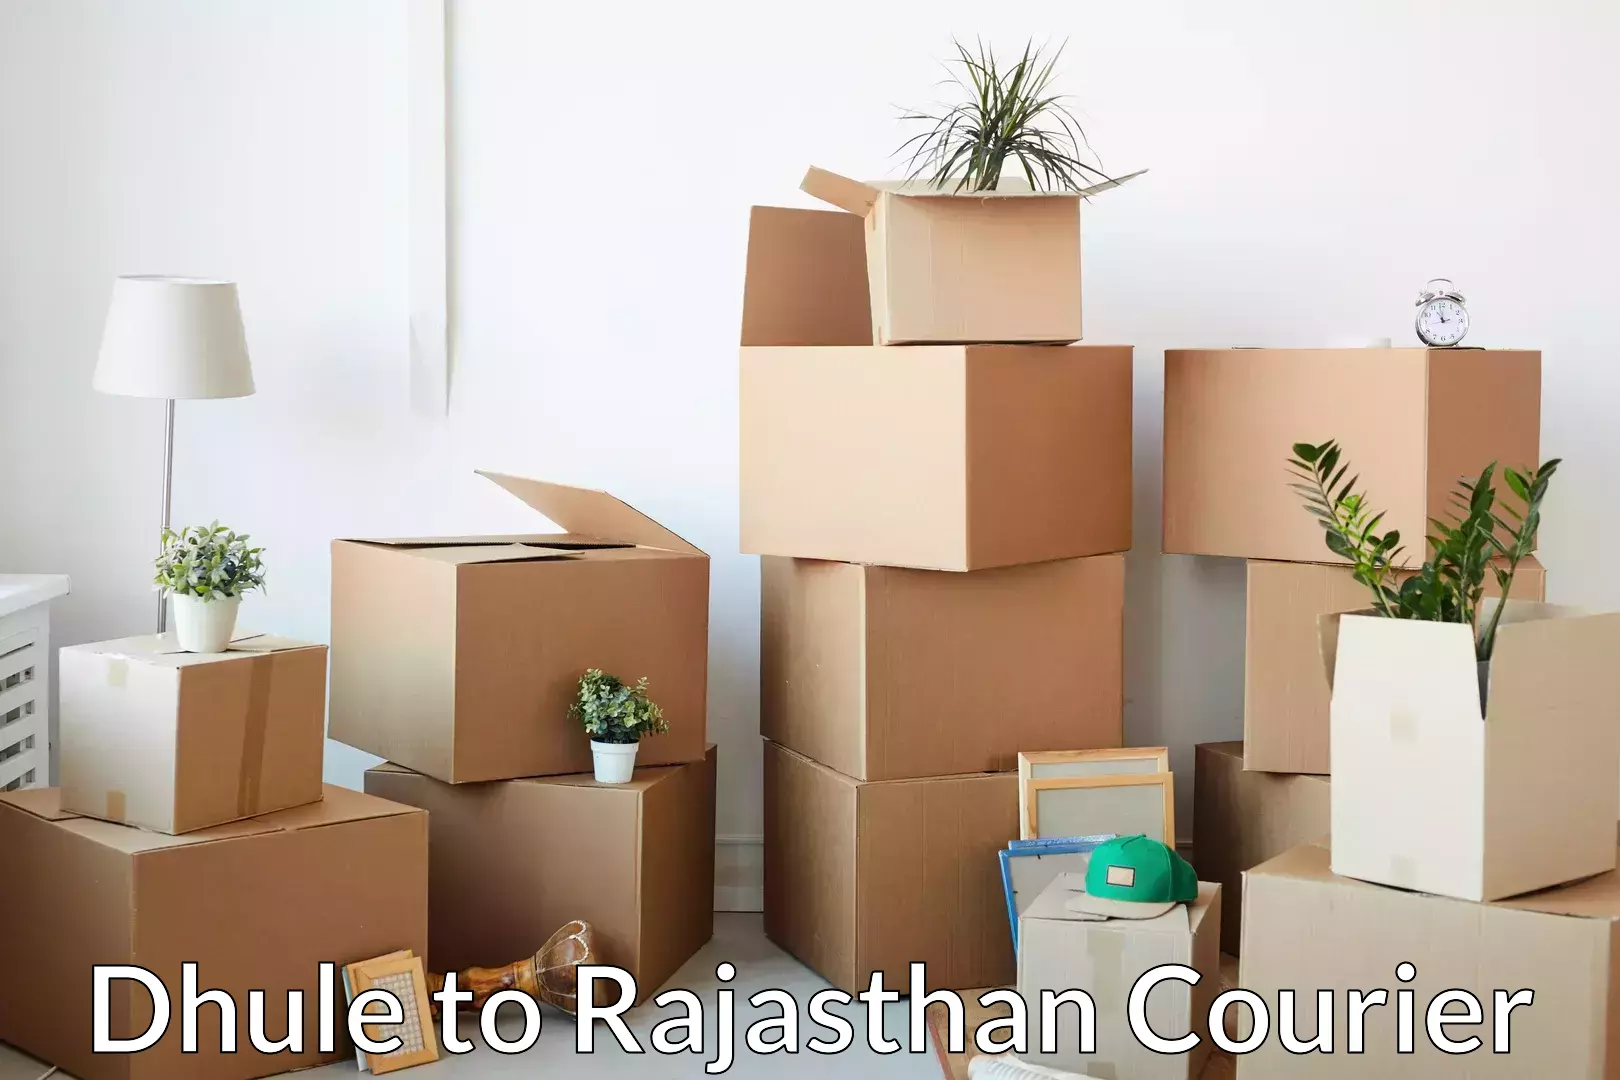 Trusted moving company Dhule to Rajasthan